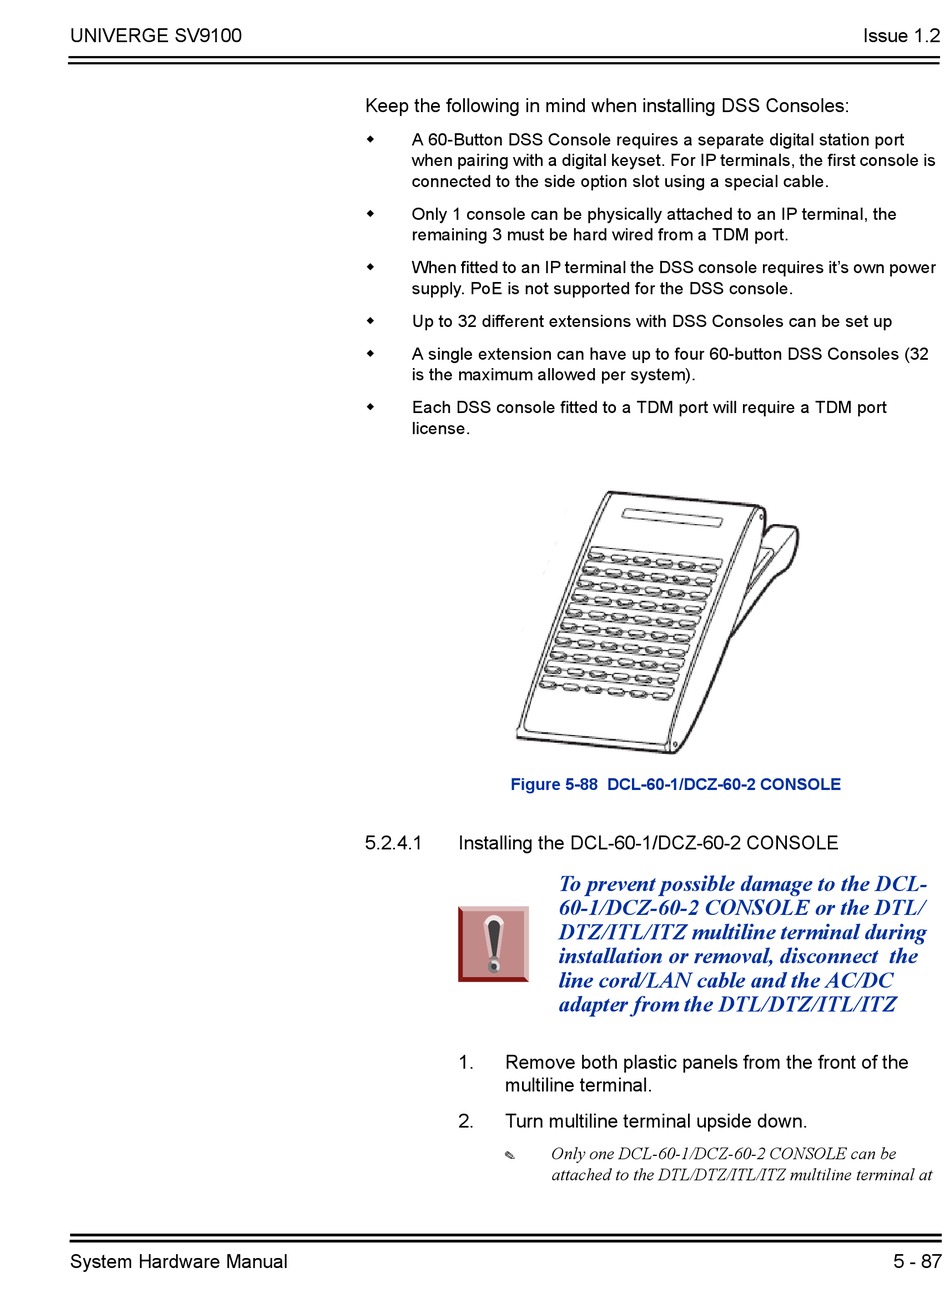 Installing The Dcl-60-1/Dcz-60-2 Console - NEC Univerge SV9100 Hardware  Manual [Page 347] | ManualsLib